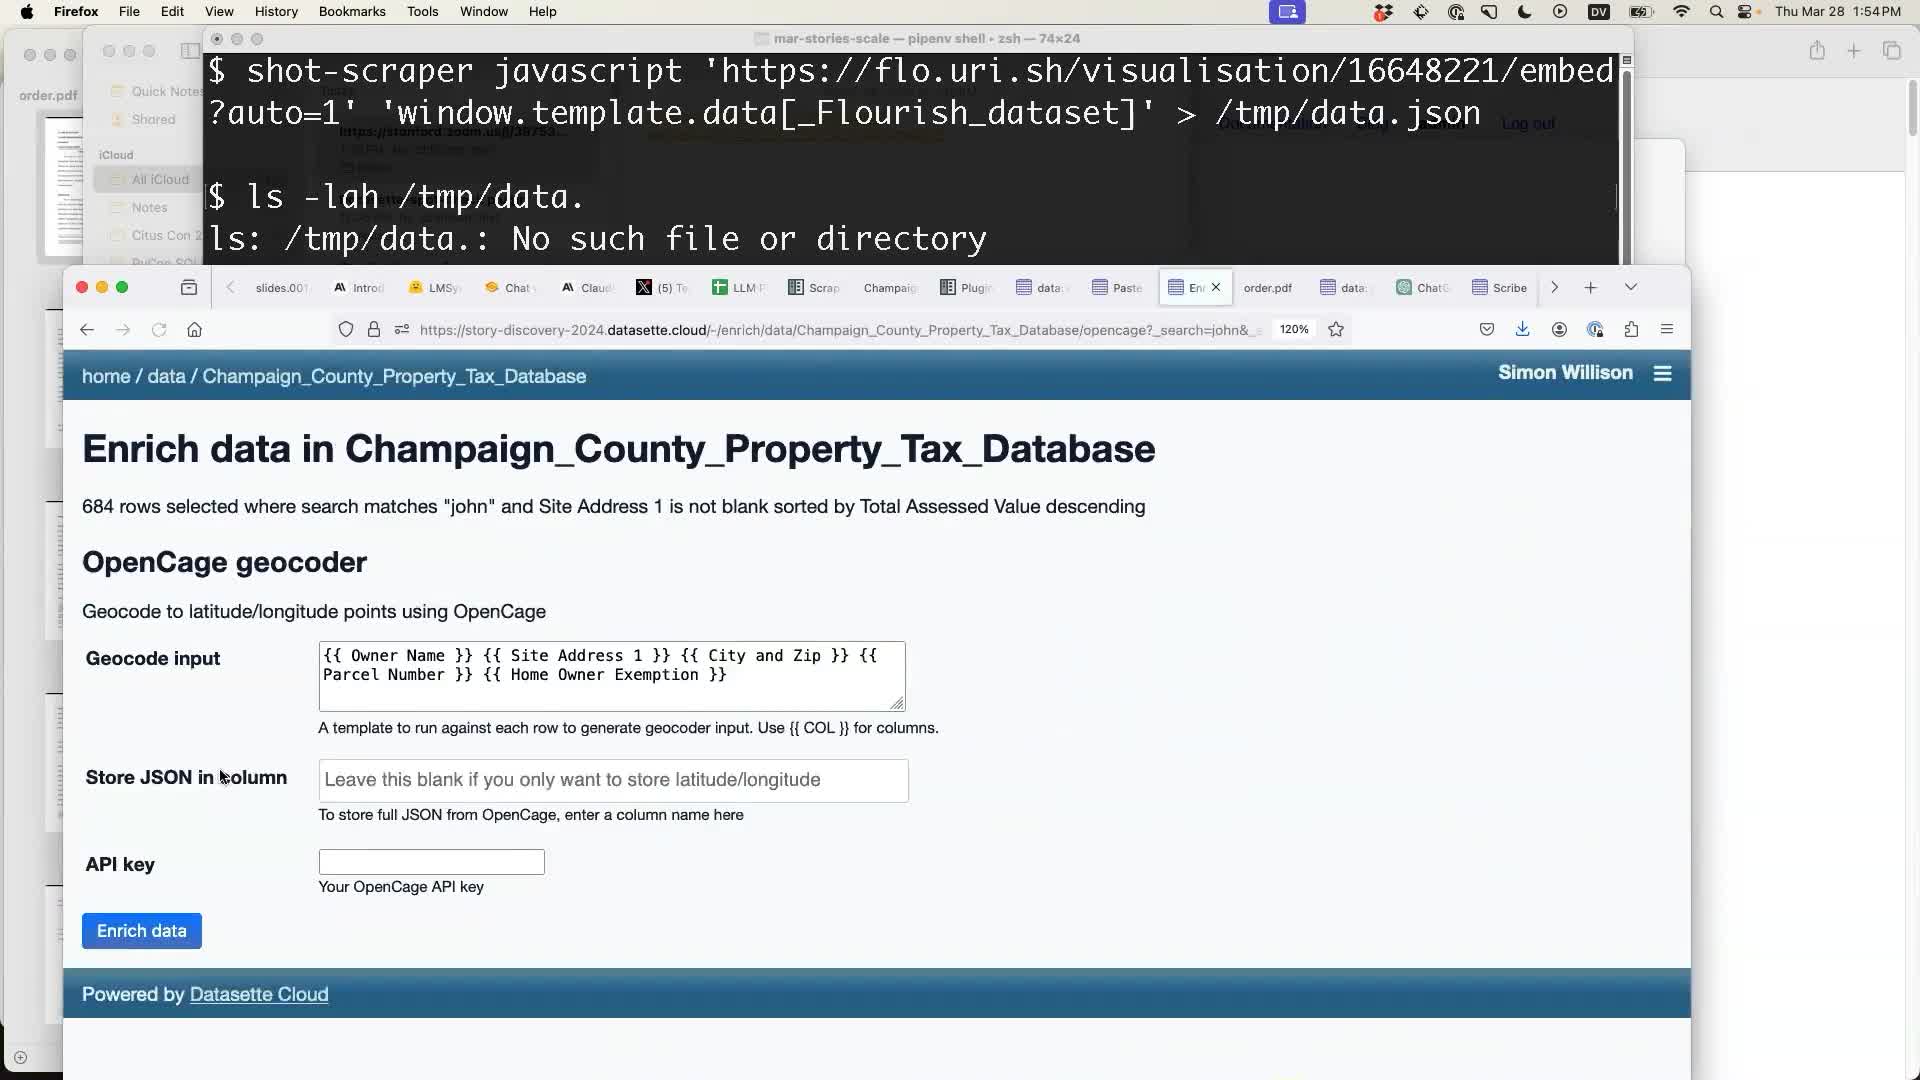 Enrich data in Champaign_County Property Tax Database. 684 rows selected where search matches "john" and Site Address 1 is not blank sorted by Total Assessed Value descending. to latitude/longitude points using OpenCage. Geocode input: {{ Owner Name }} {{ Site Address 1 }} {{ City and Zip }} {{ Parcel Number }}. Checkbox for Store JSON in a column. API key input: Your OpenCage API key. Button: Enrich data